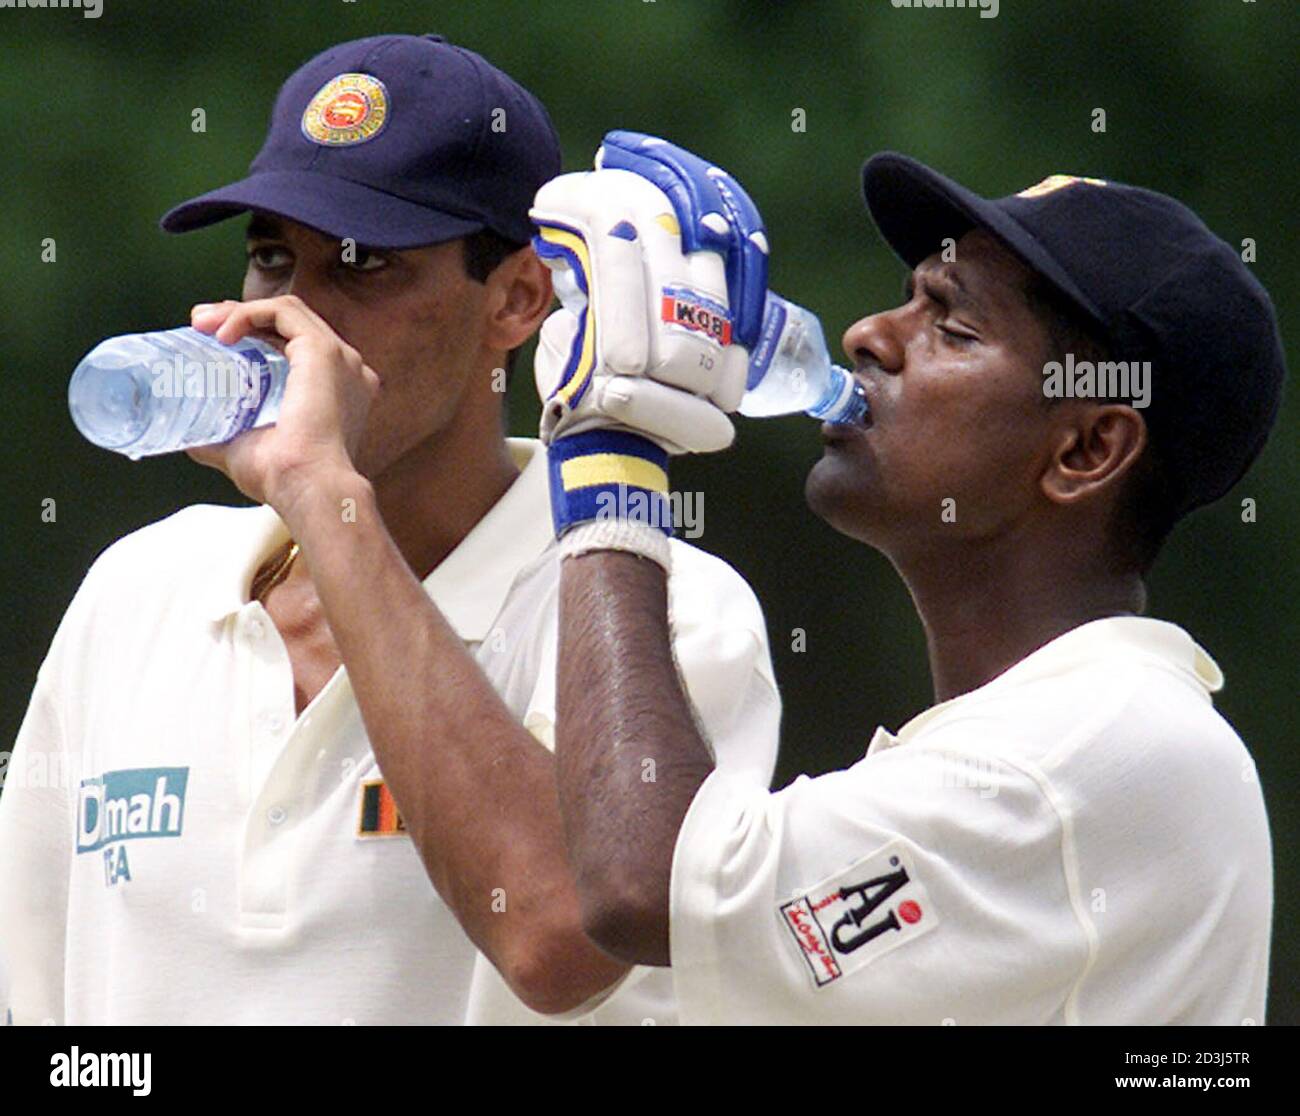 Sri Lankan batsmen Michael Vandort (L) and Naveed Nawas drink water during the third day of the second cricket test between Sri Lanka and Bangladesh at Singhalese Sports Club ground in Colombo, Sri Lanka on July 30, 2002. REUTERS/Anuruddha Lokuhapuarachchi  AL/CP Stock Photo